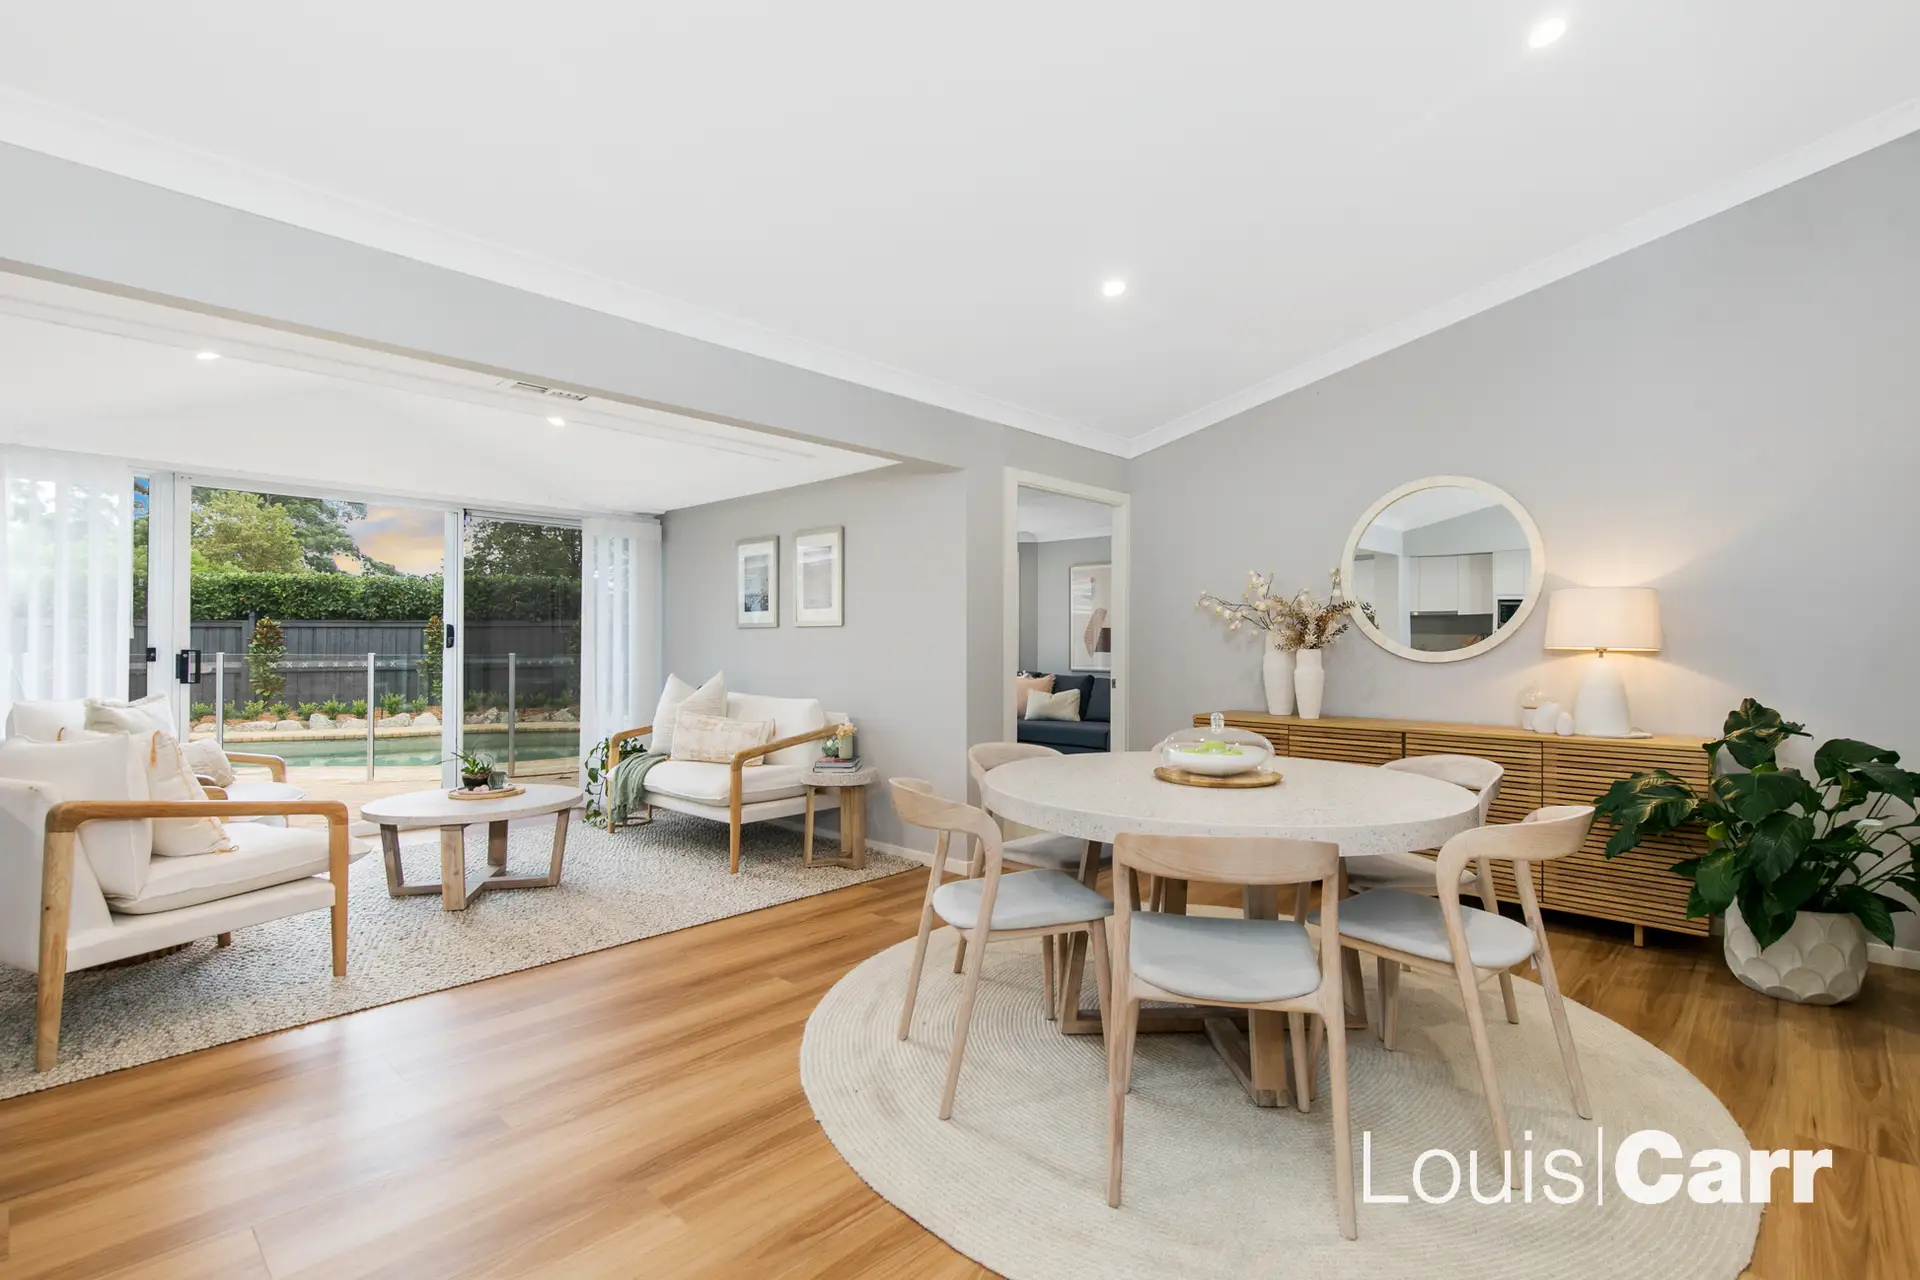 Photo #7: 5 Francis Oakes Way, West Pennant Hills - Sold by Louis Carr Real Estate